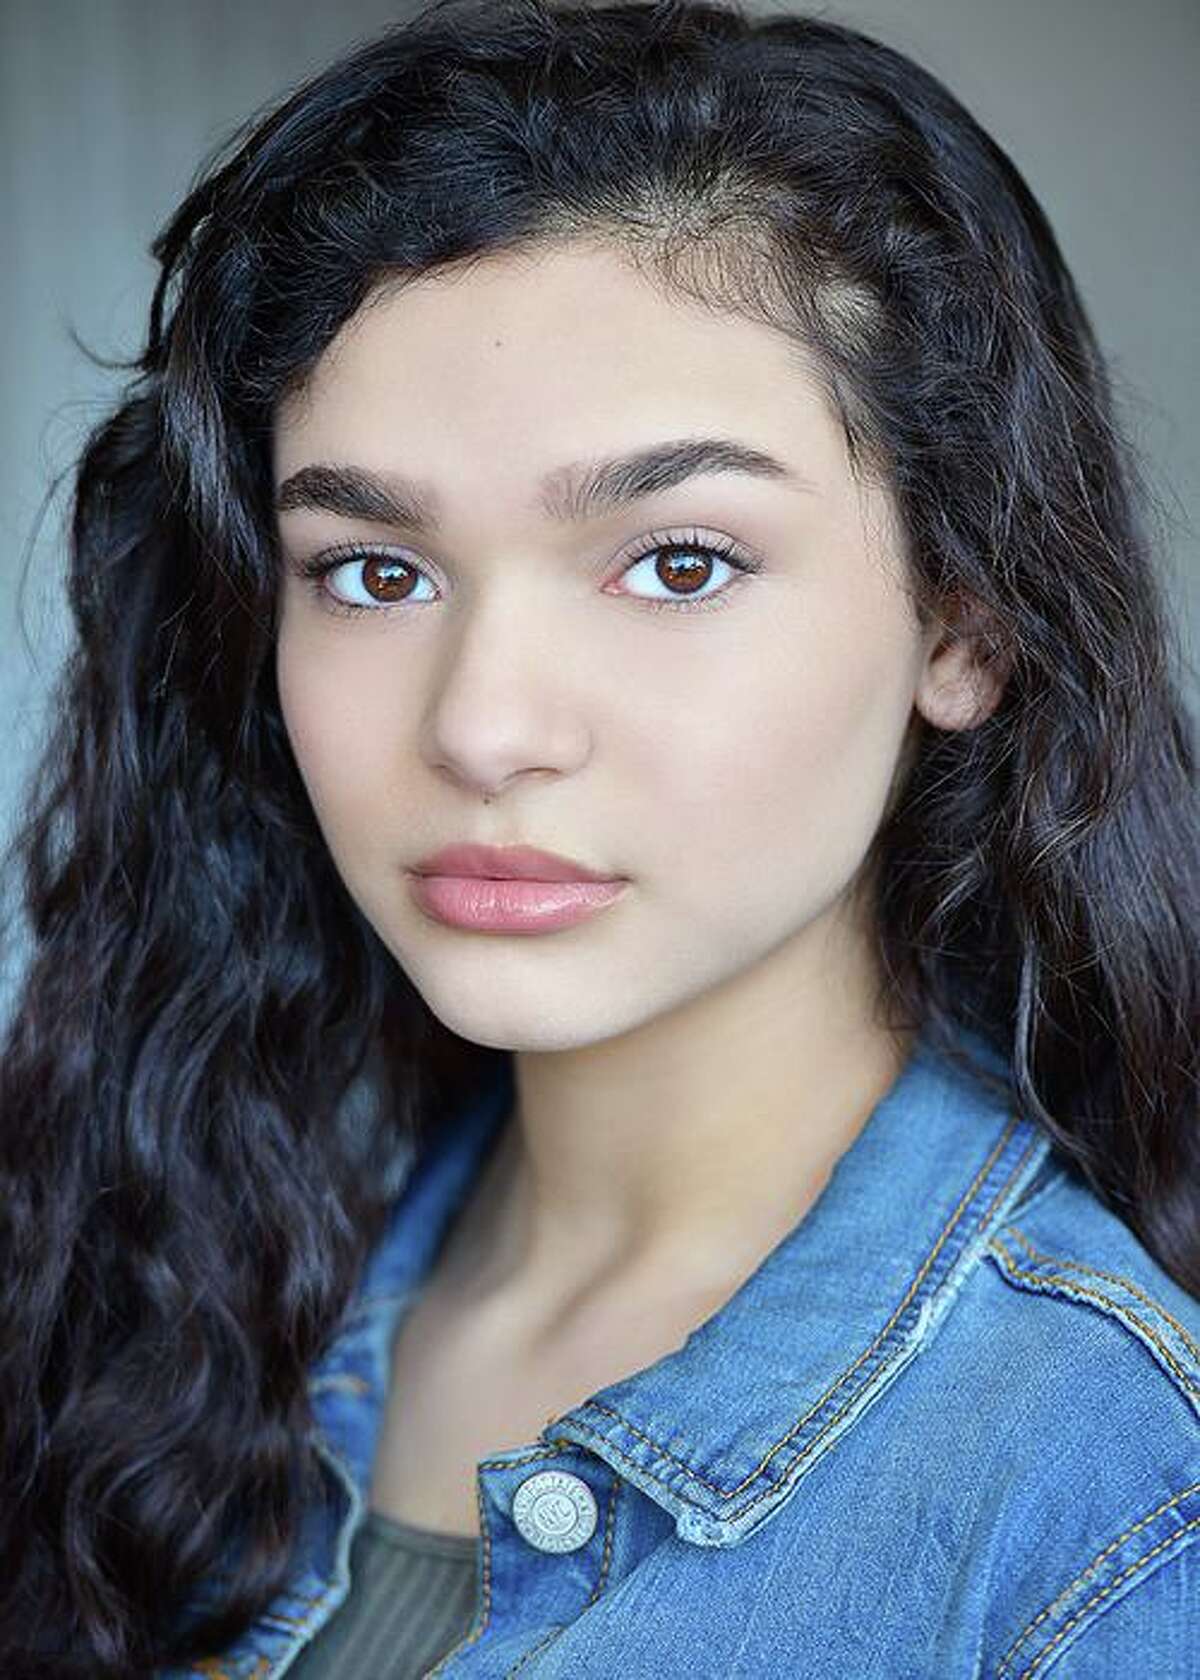 Paulina Chávez from San Antonio stars in the title role of 'The Expanding Universe of Ashley Garcia,' a new Netflix comedy series that debuts Feb. 17.